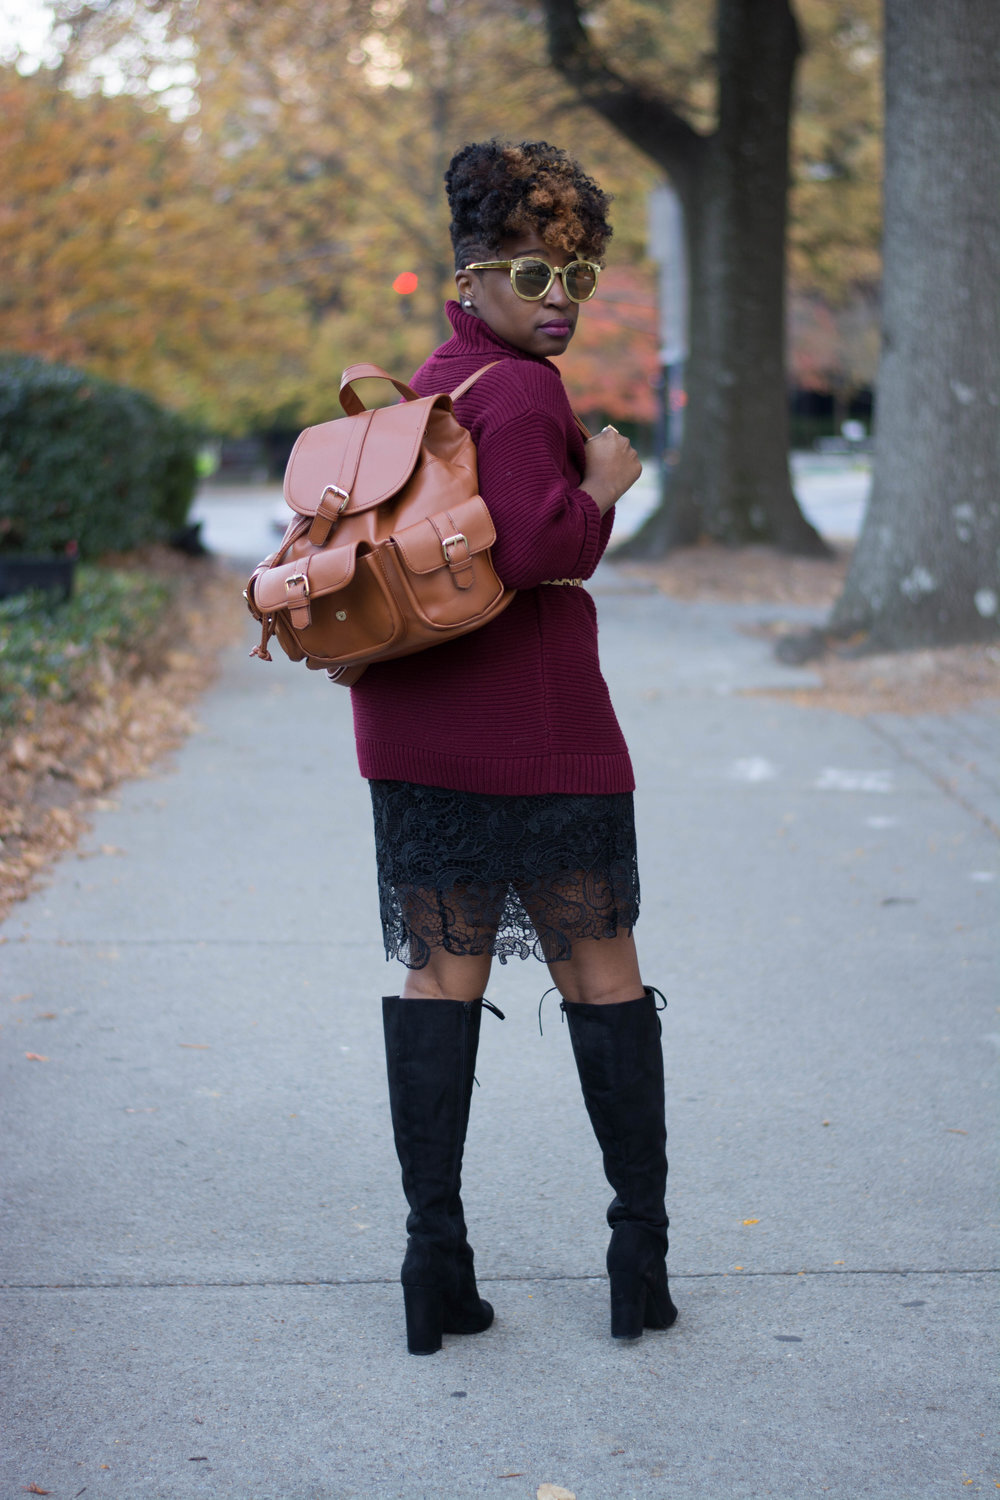 Black Lace skirt + Lace-up Front Boots_1.jpg